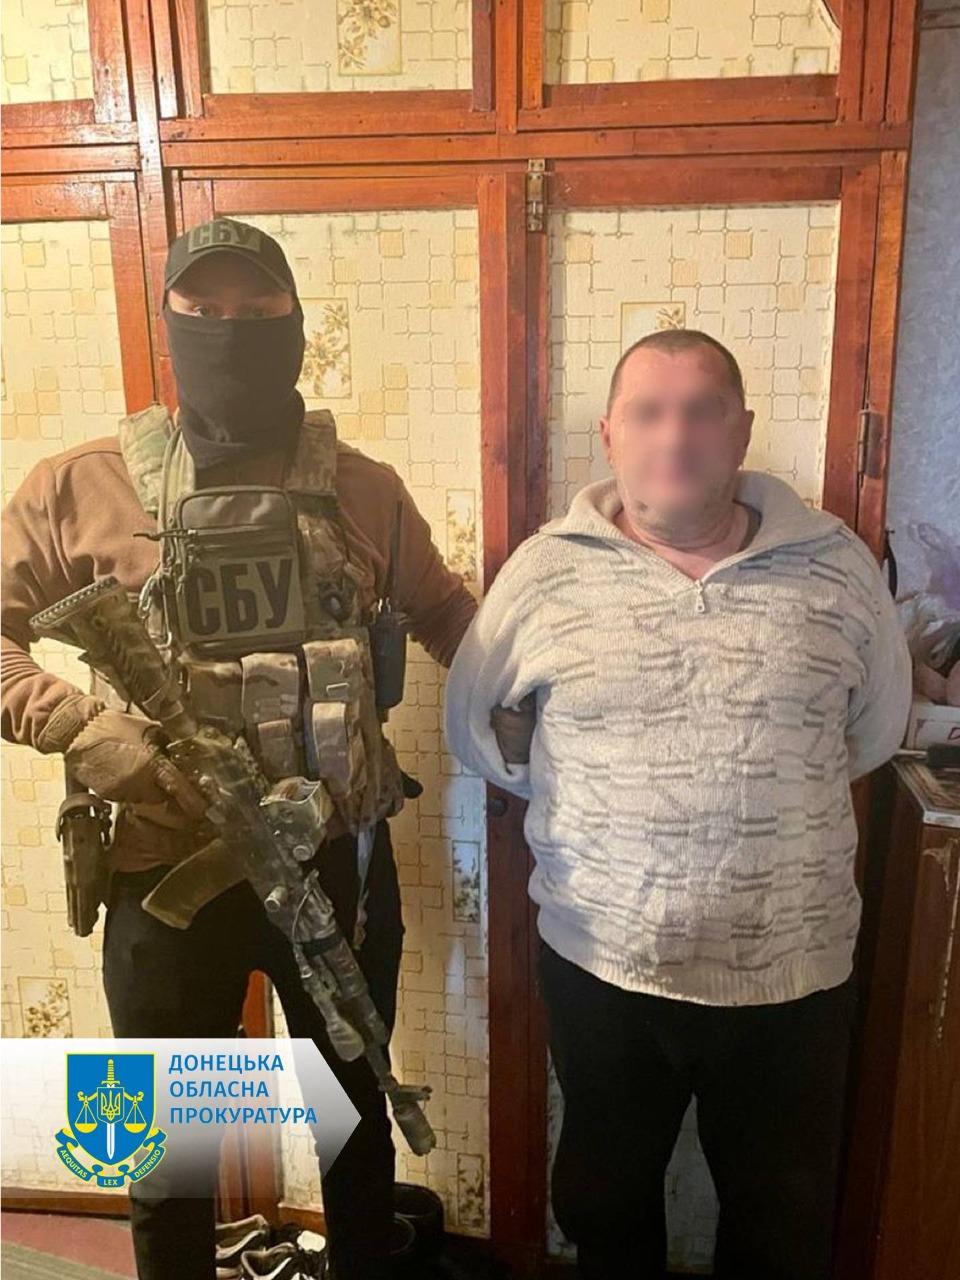 The man is suspected of unauthorized dissemination of information about the location of the Armed Forces of Ukraine / photo gp.gov.ua